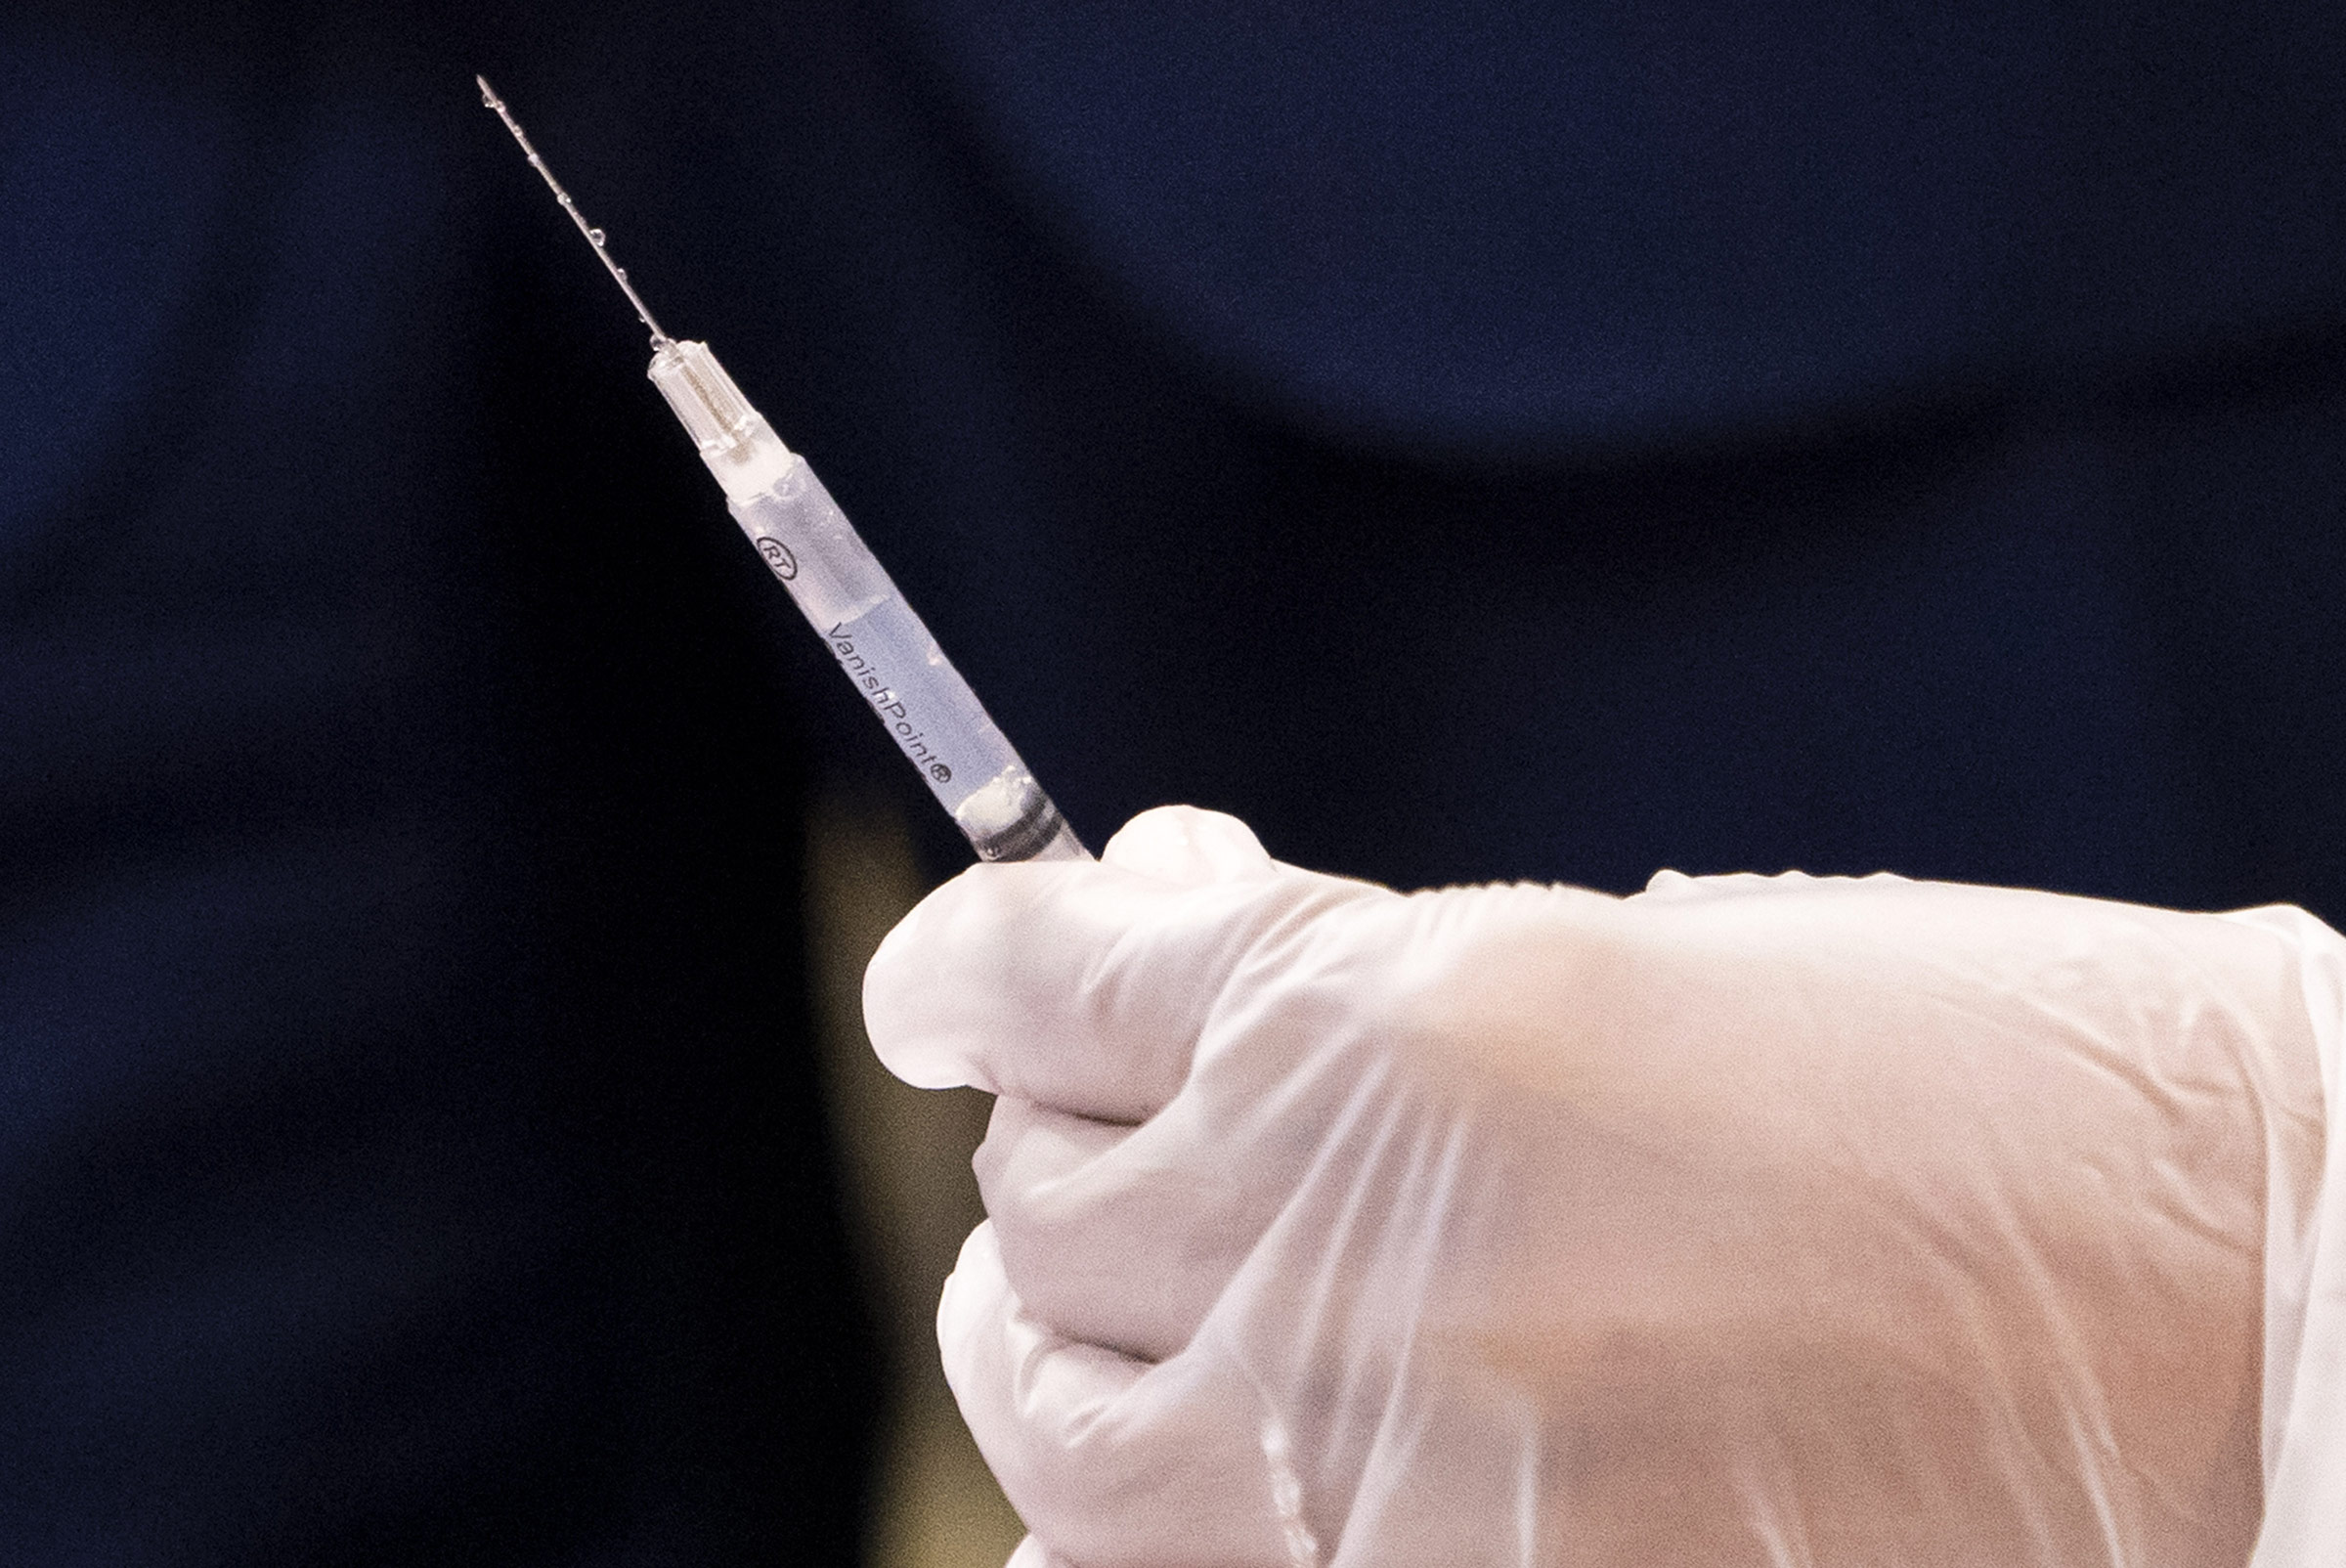 A healthcare worker prepares a Covid-19 vaccine at a vaccination site in Washington, DC, on Monday, March 8. 